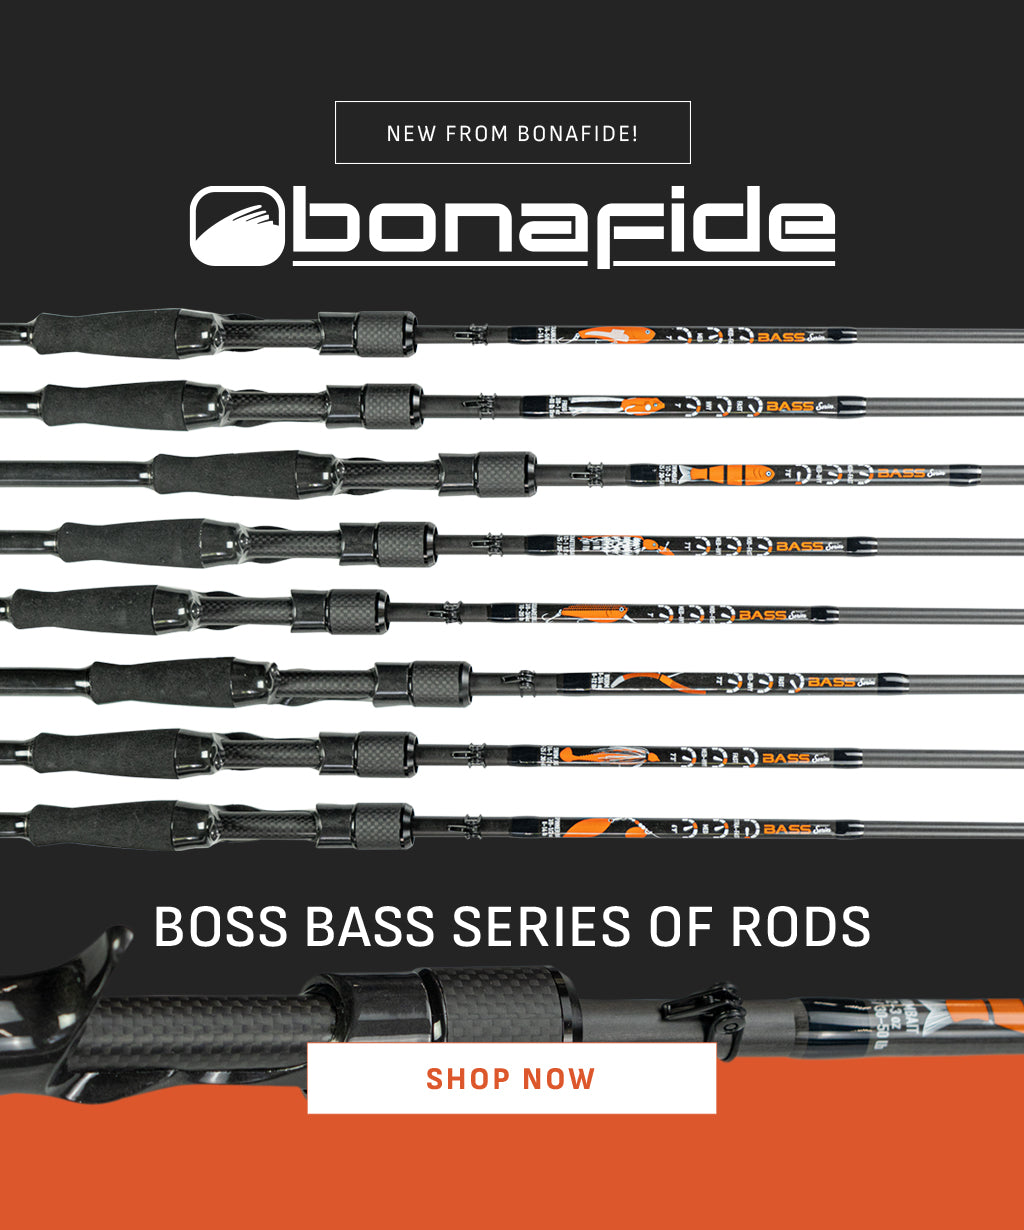 New From Bonafide®! The Bonafide Boss Bass Series of Rods: Carefully Designed for Ultimate Fishability™. Shop Now